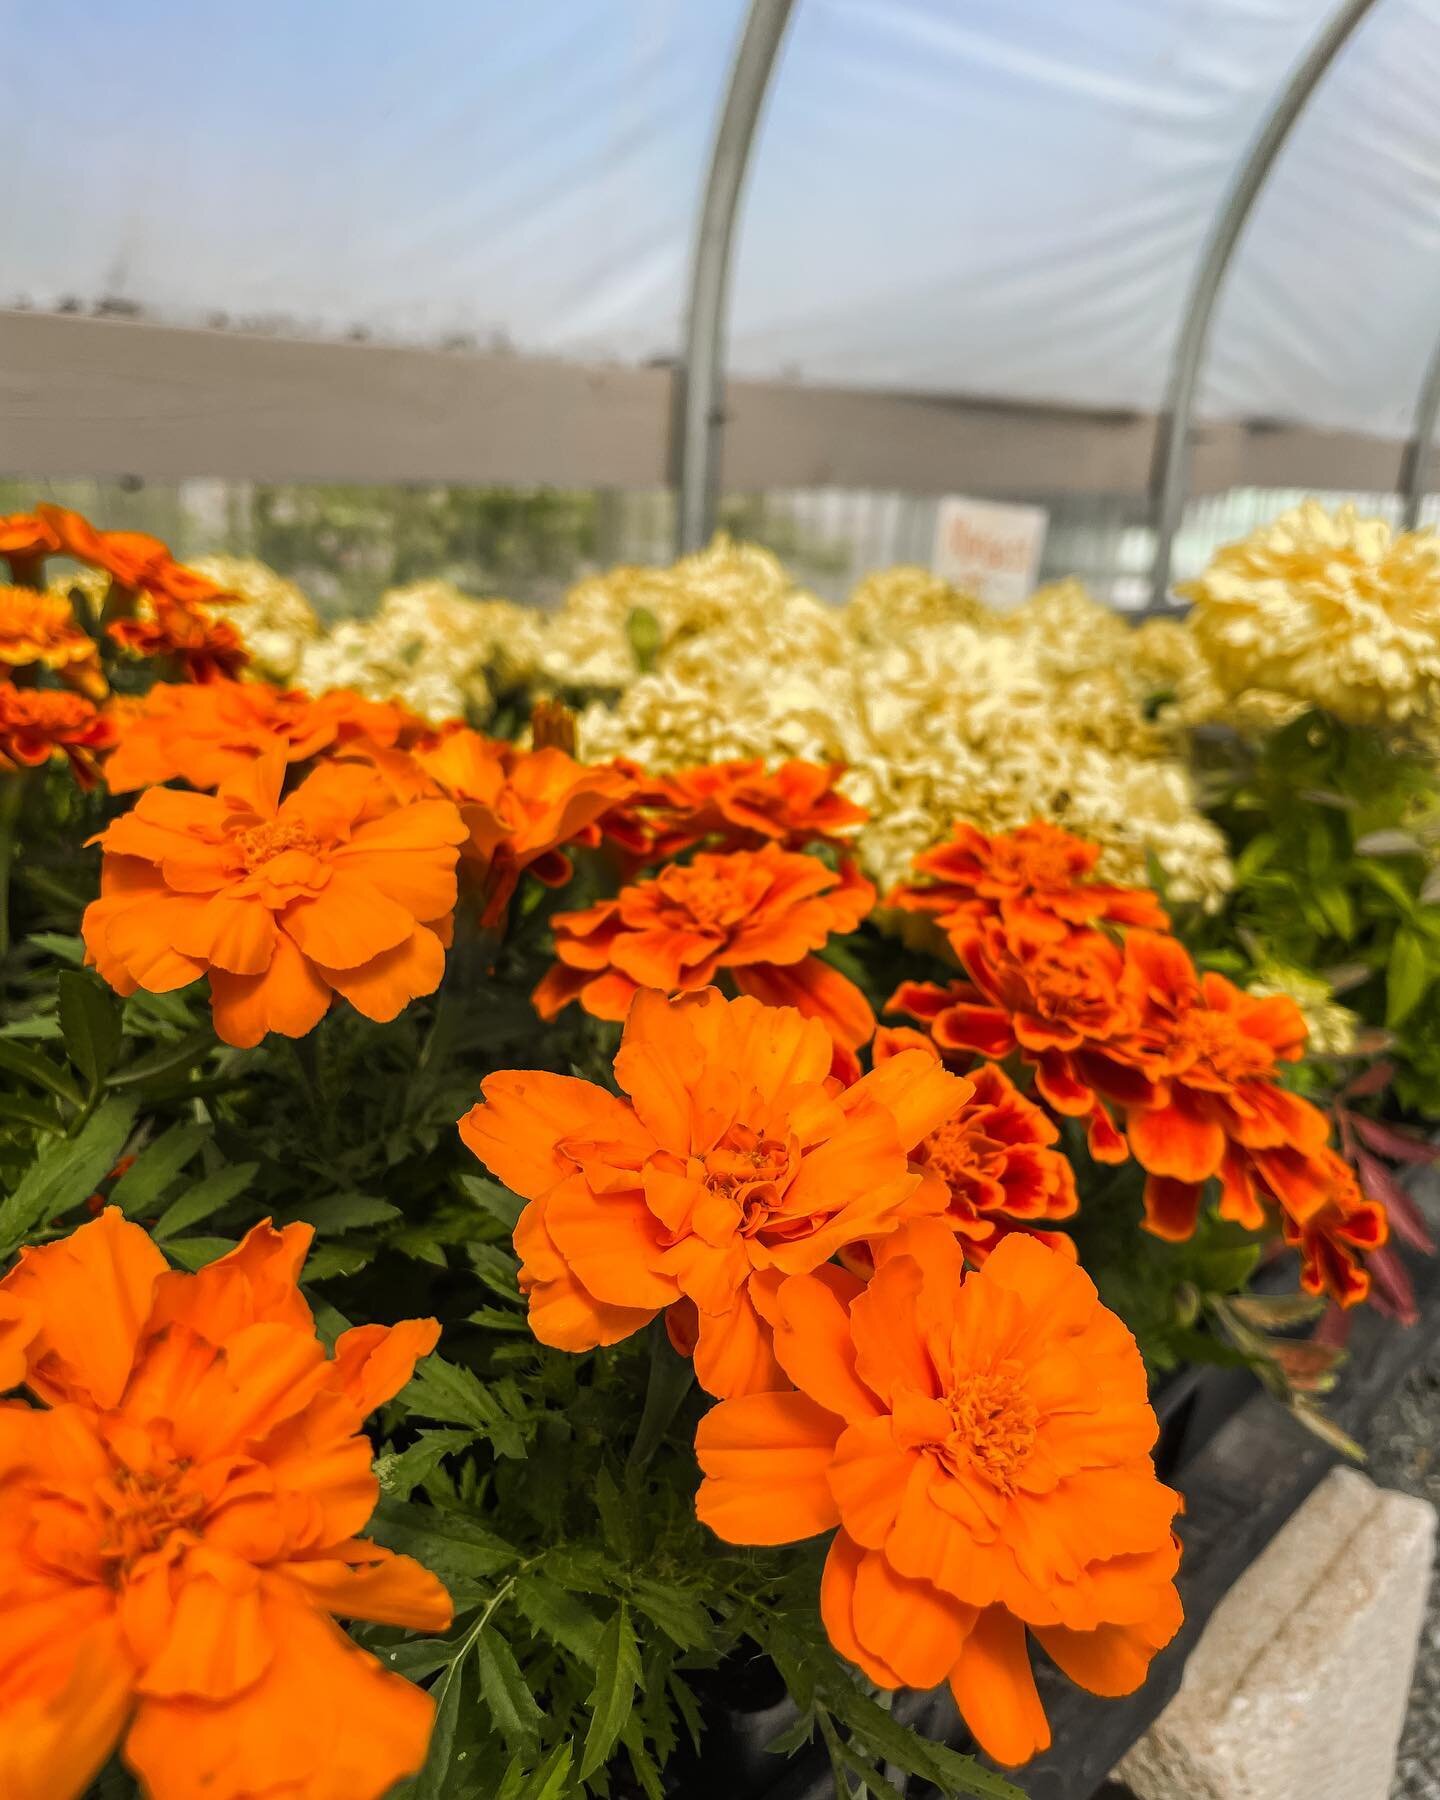 Mondays are for the Marigolds! 🤩 

Plant restock coming SOON! Keep an eye out to see what you can add to your gardens!

Open everyday! 9-7pm Monday-Saturday and 9-6pm Sunday! 

Photo creds to @abigailhollisphoto 📸